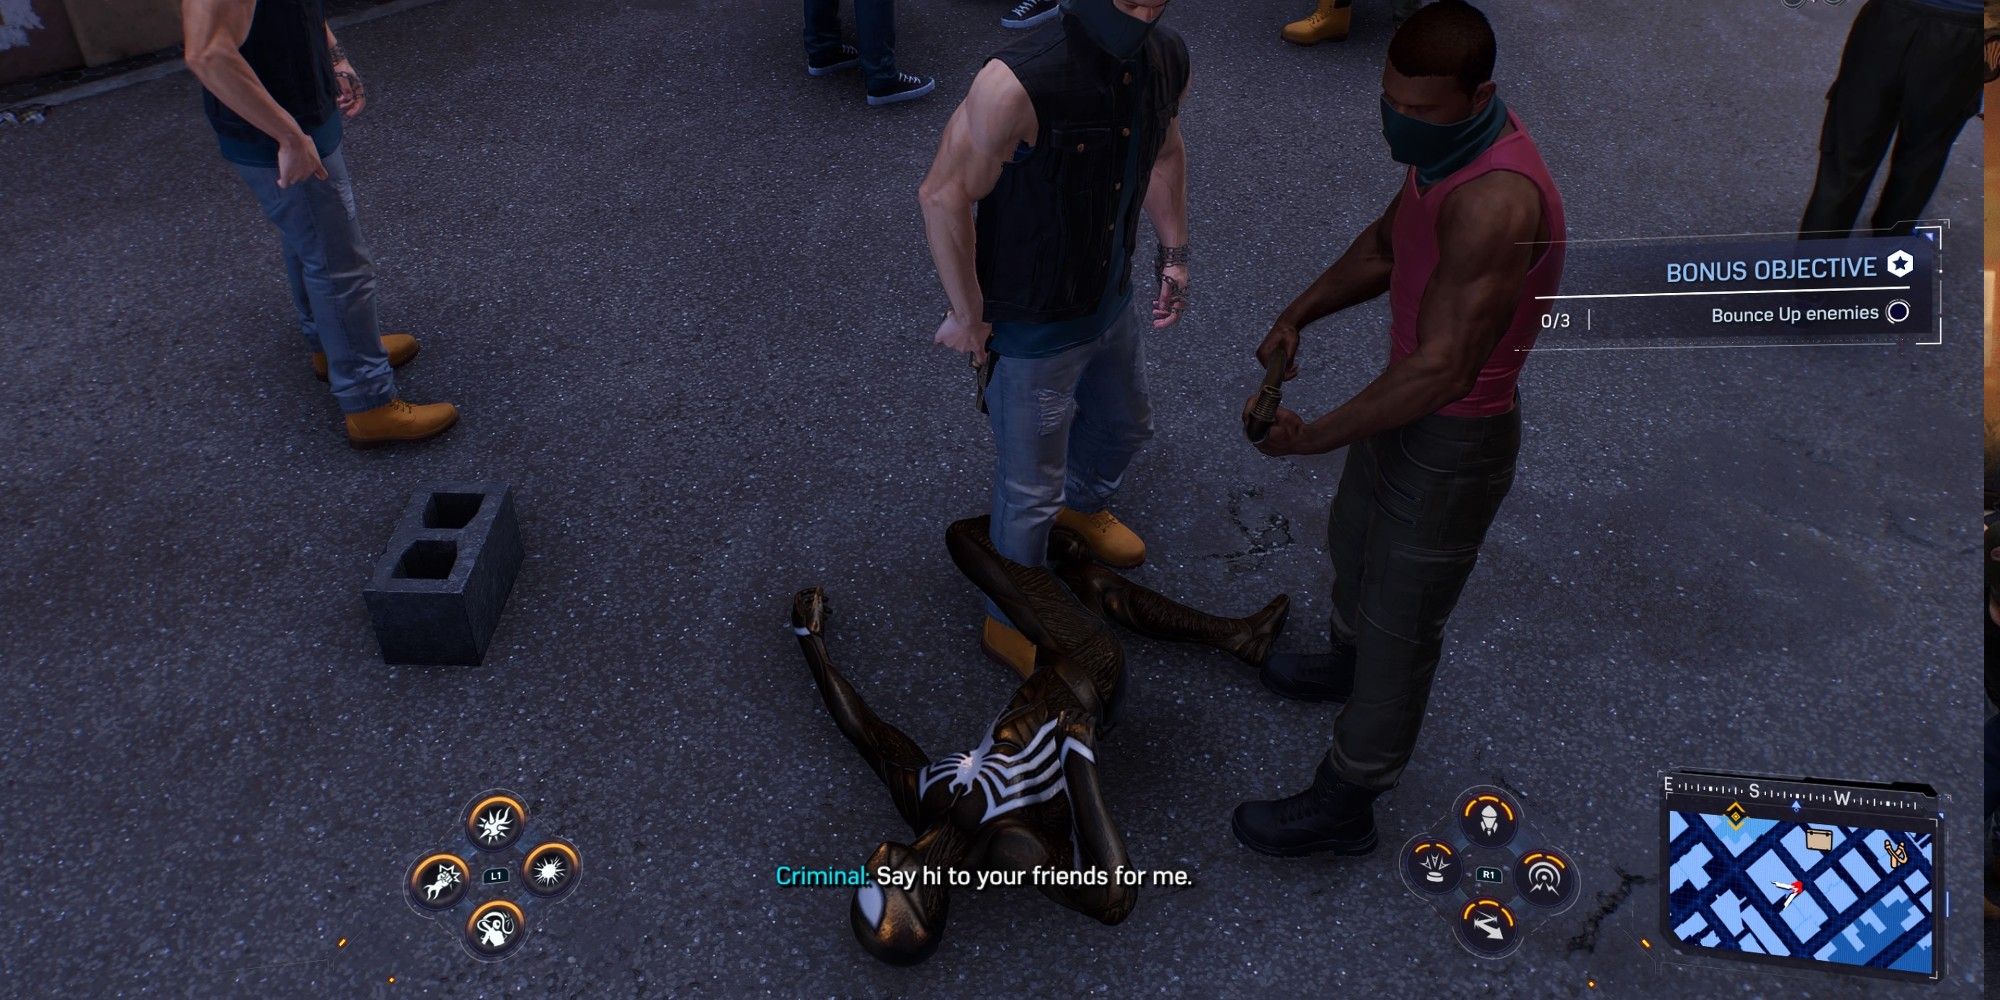 Peter knocked out on the ground around criminals